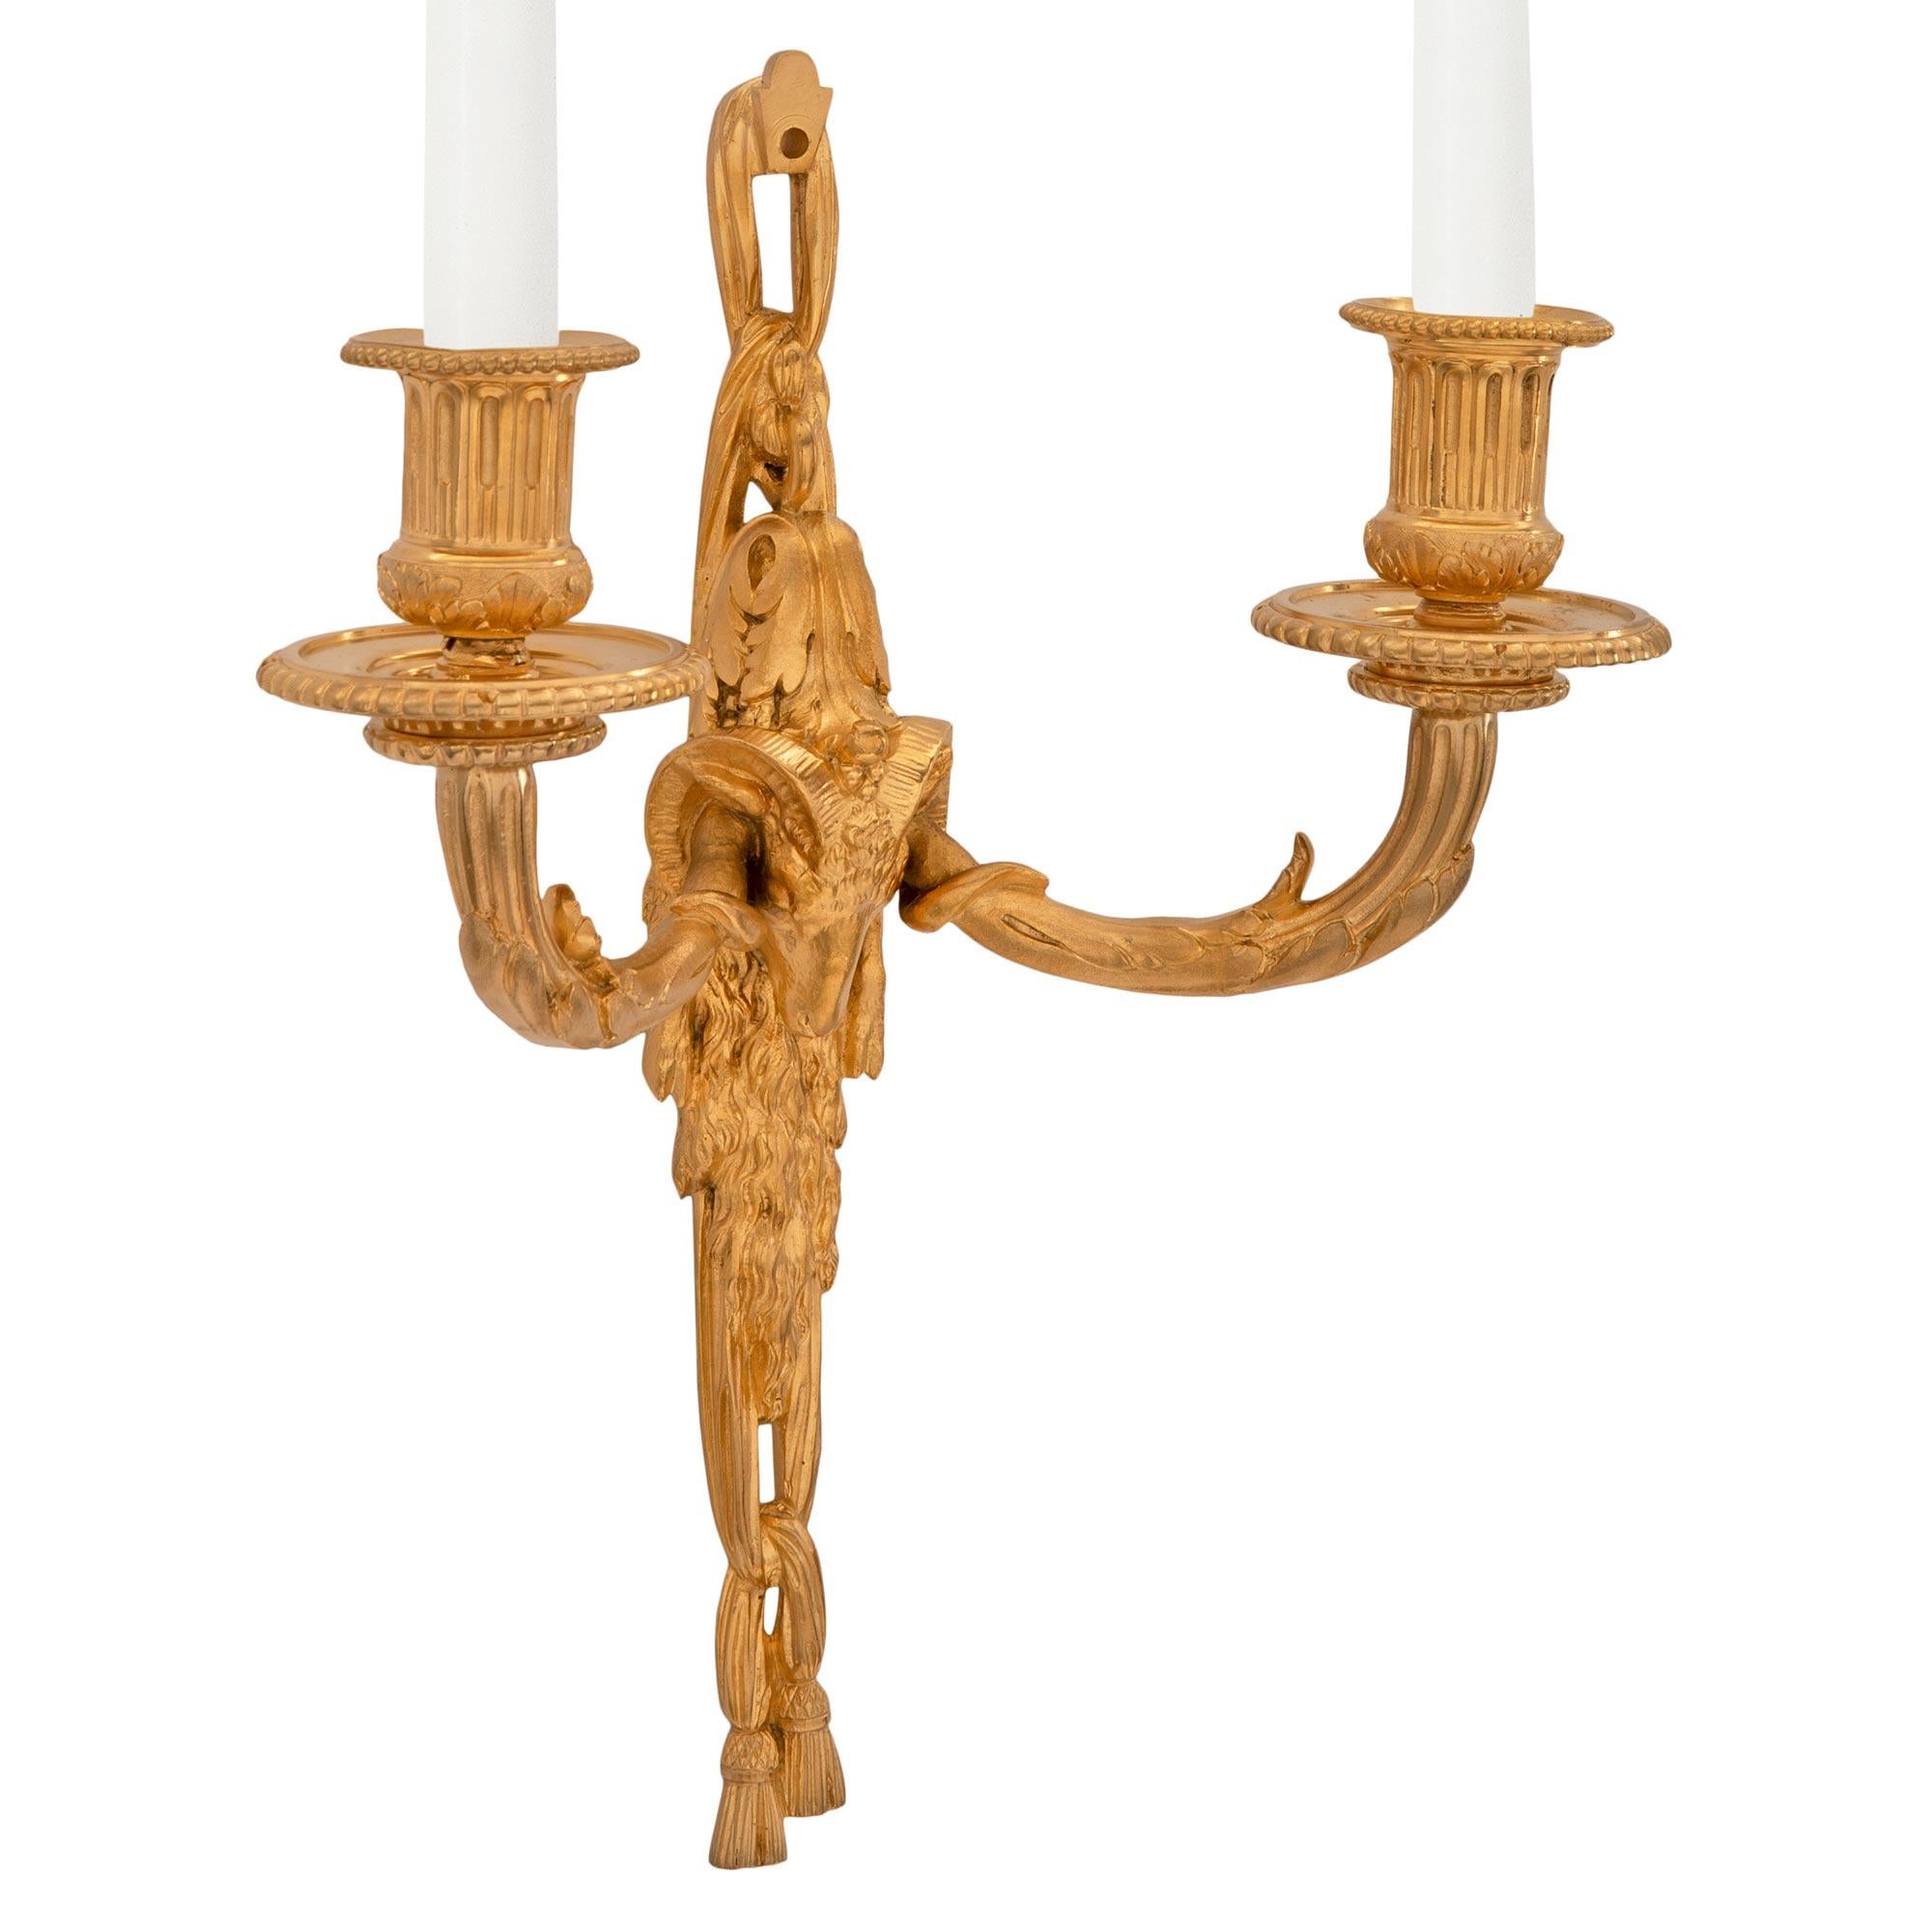 An elegant and very high quality pair of French 19th century Louis XVI st. ormolu sconces. Each two arm sconce is centered by charming and wonderfully executed tied garland tassels below the richly chased rams head amidst fur and striking acanthus